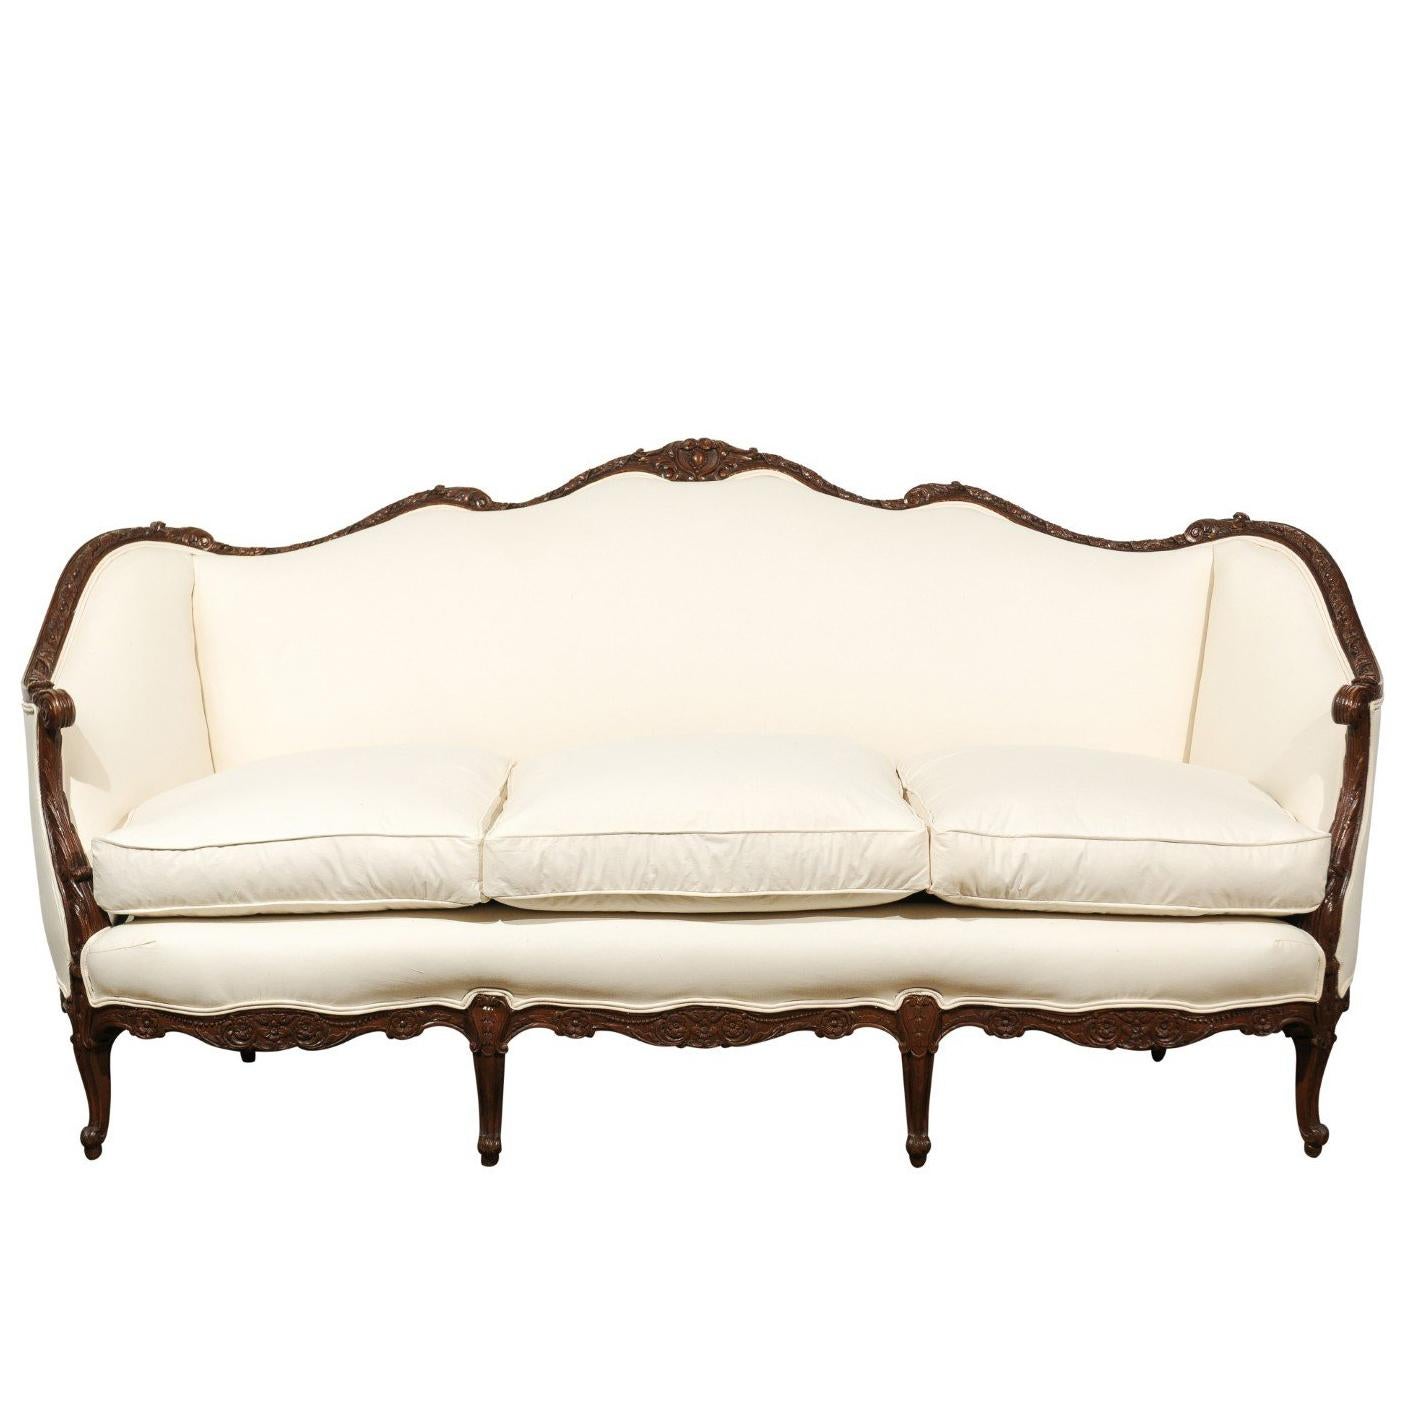 French Louis XV Style 19th Century Hand-Carved Walnut Canapé with New Upholstery